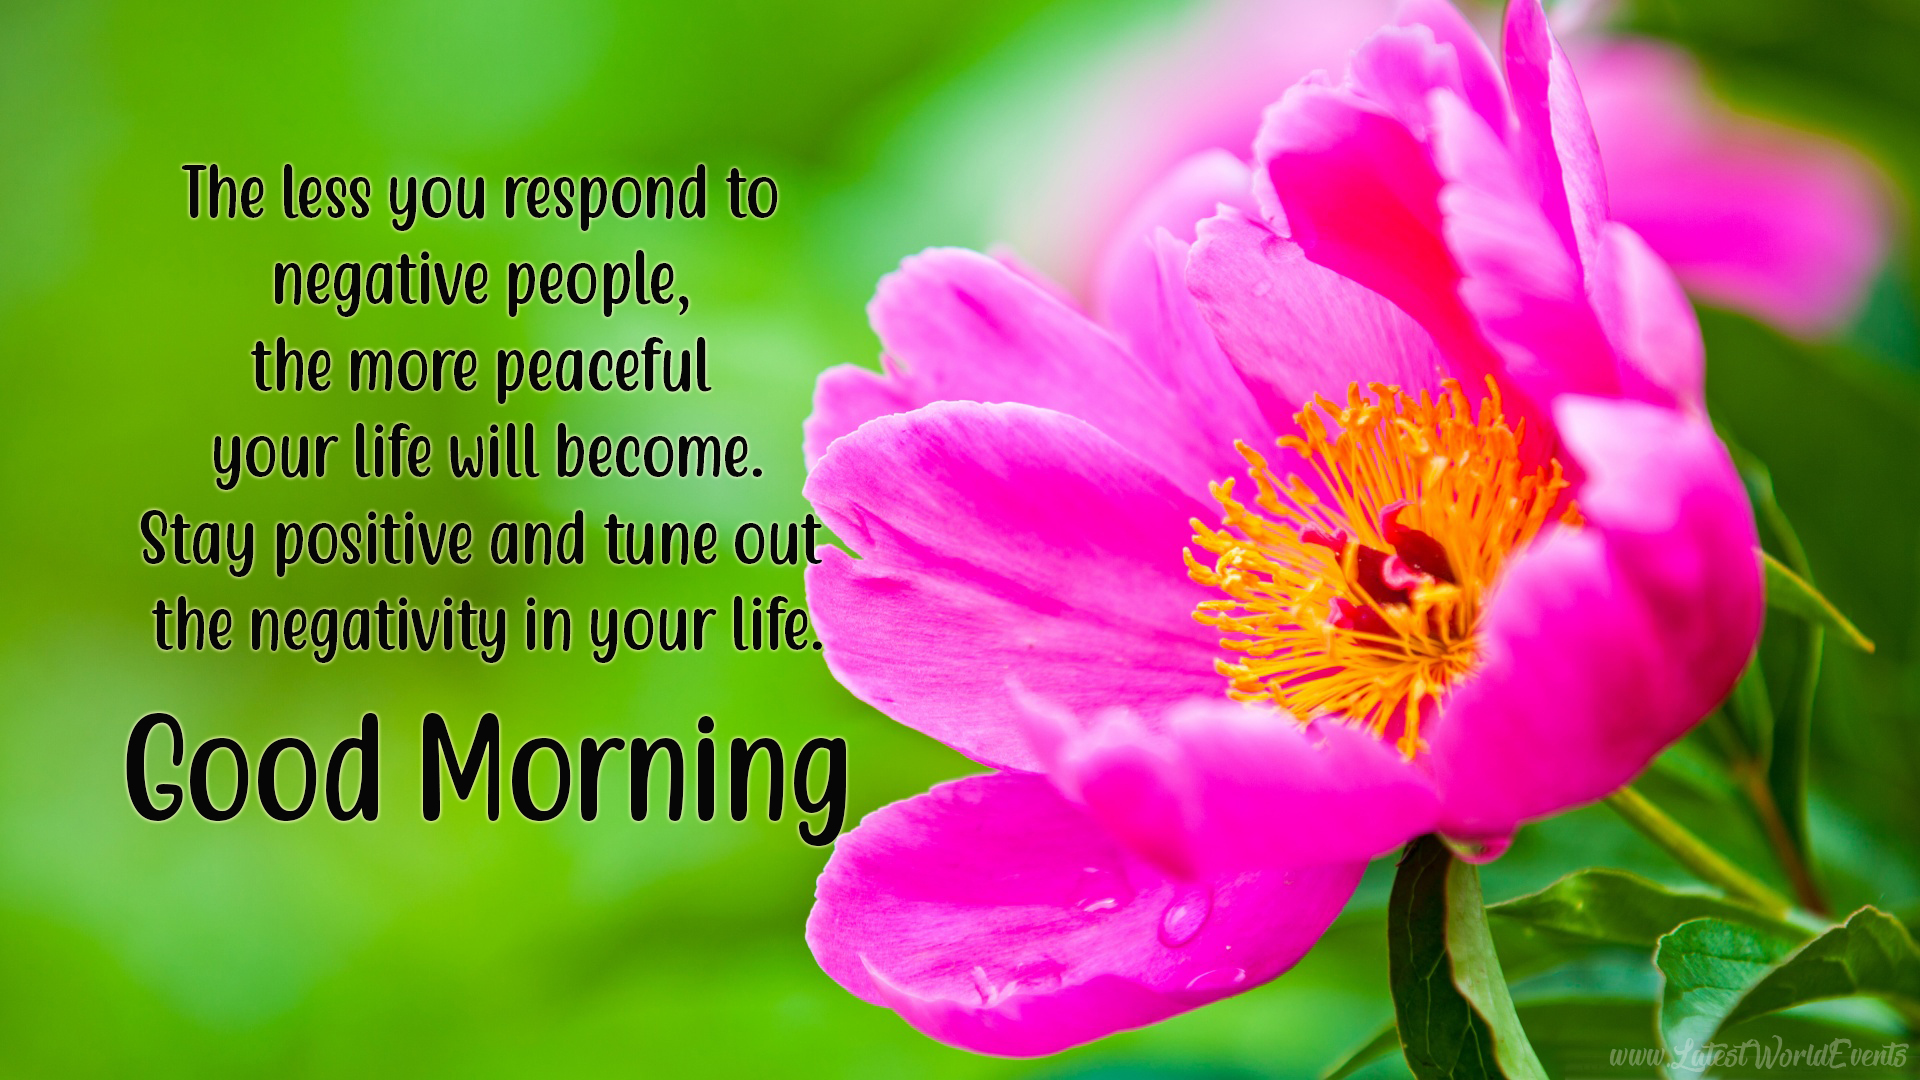 Download-heart-touching-good-morning-messages-for-friends